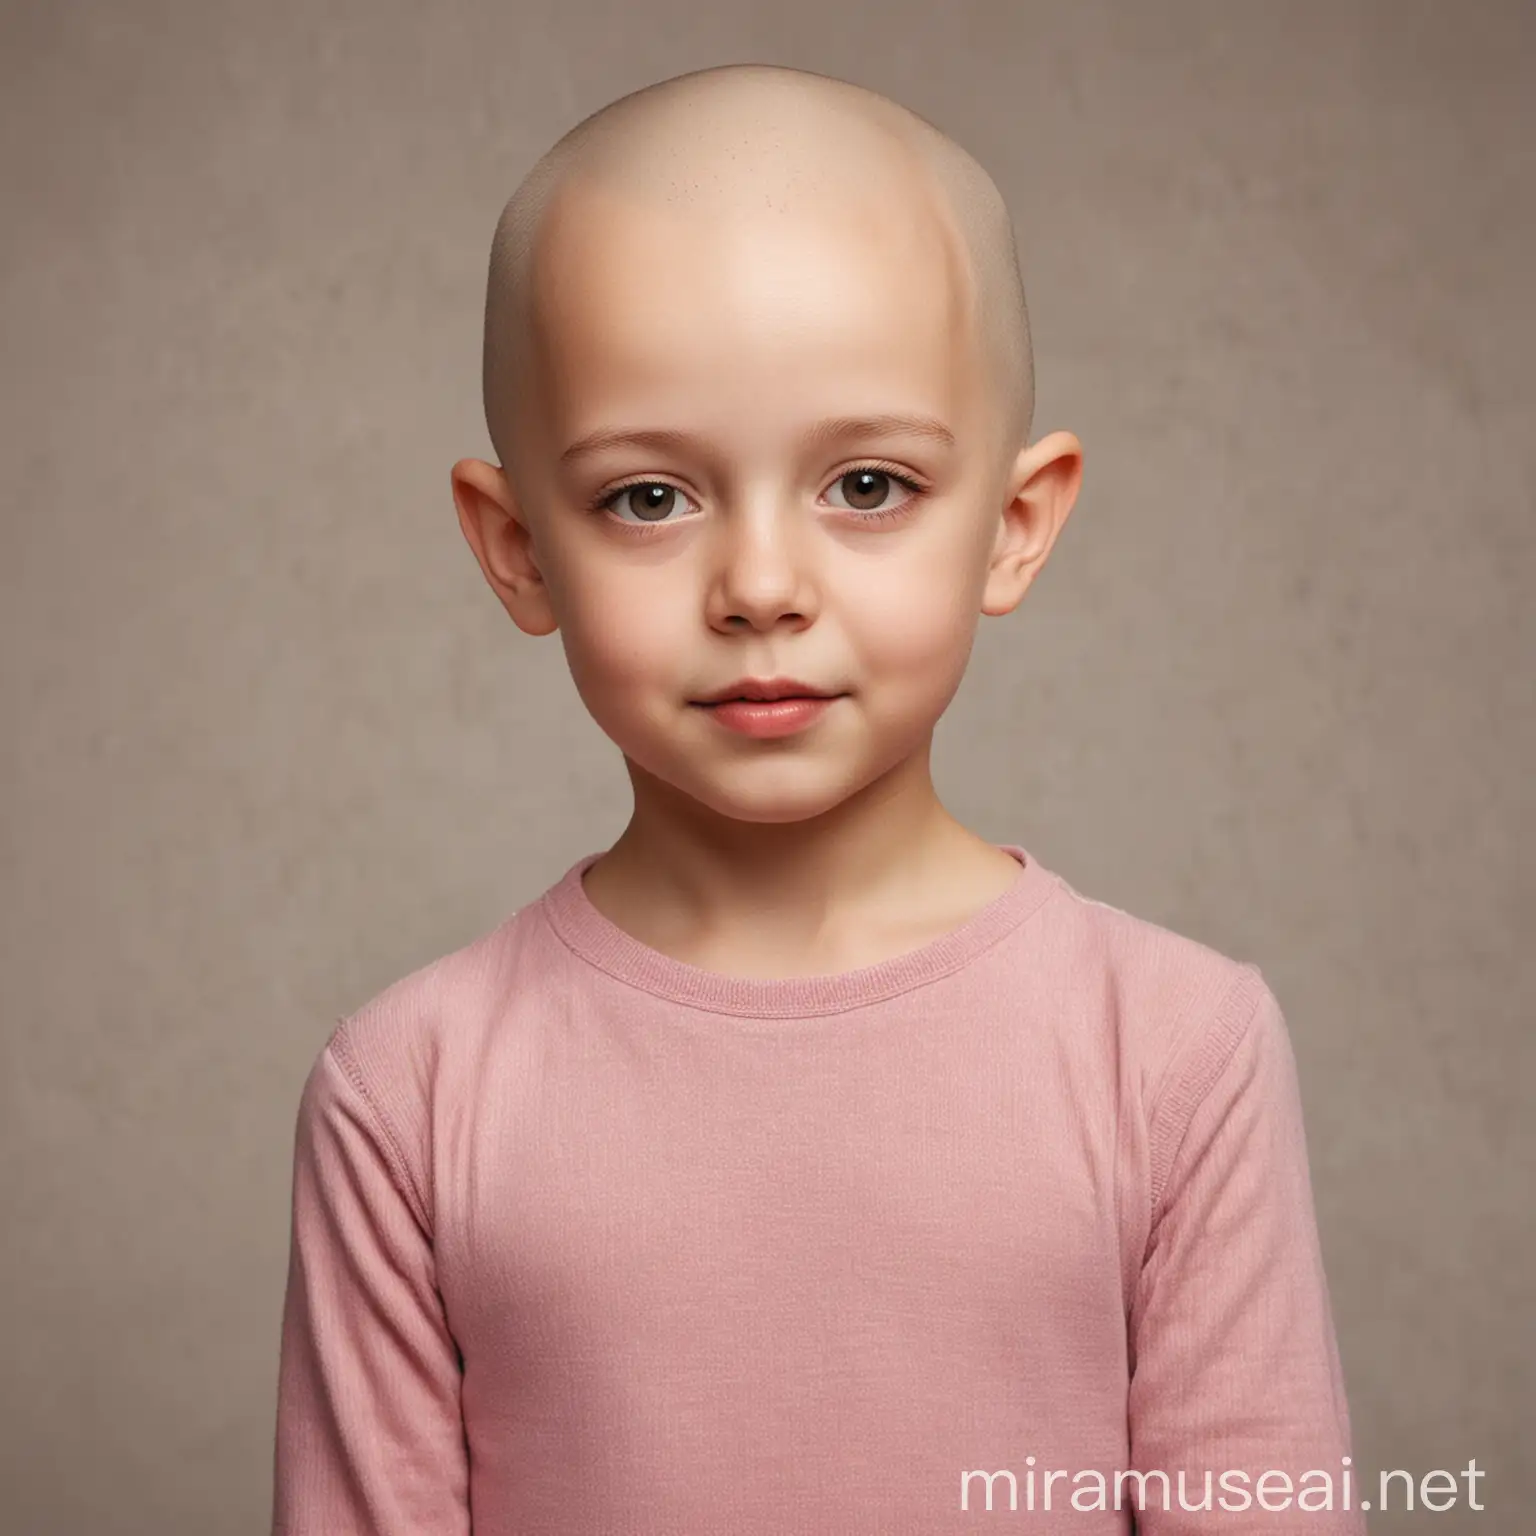 Bald 7YearOld Girl Exudes Confidence and Youthfulness